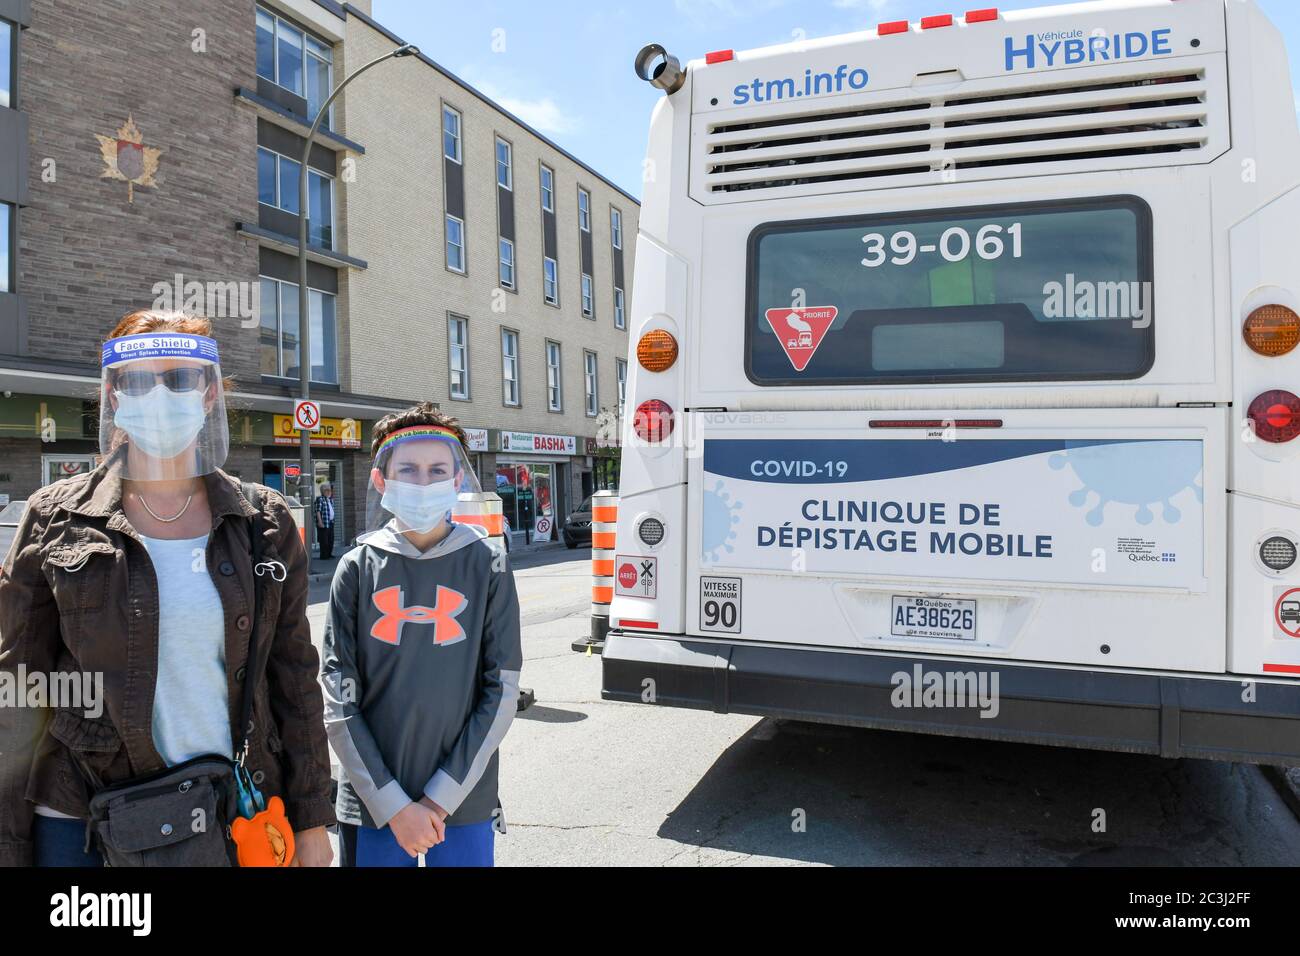 Mother & son wearing protective face masks and face shields during Covid-19 Pandemic standing in front of Covid19 mobile free testing clinic, Montreal Stock Photo